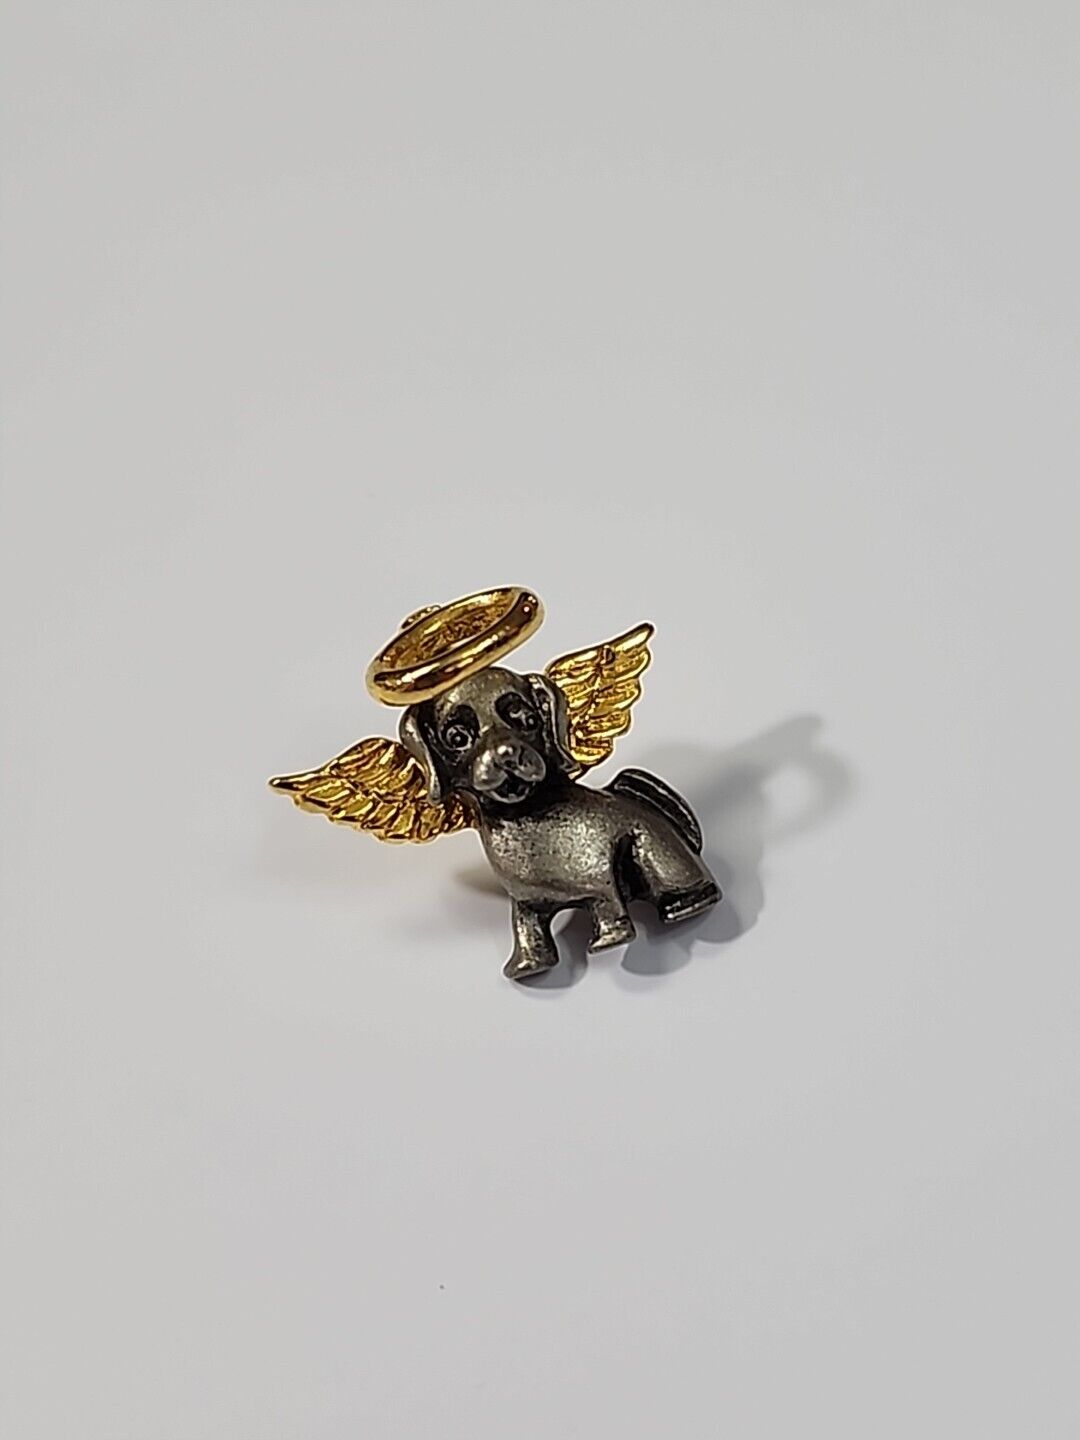 Dog Guardian Angel Lapel Pin Puppy Pewter w/ Gold Color Wings & Halo by CAMCO